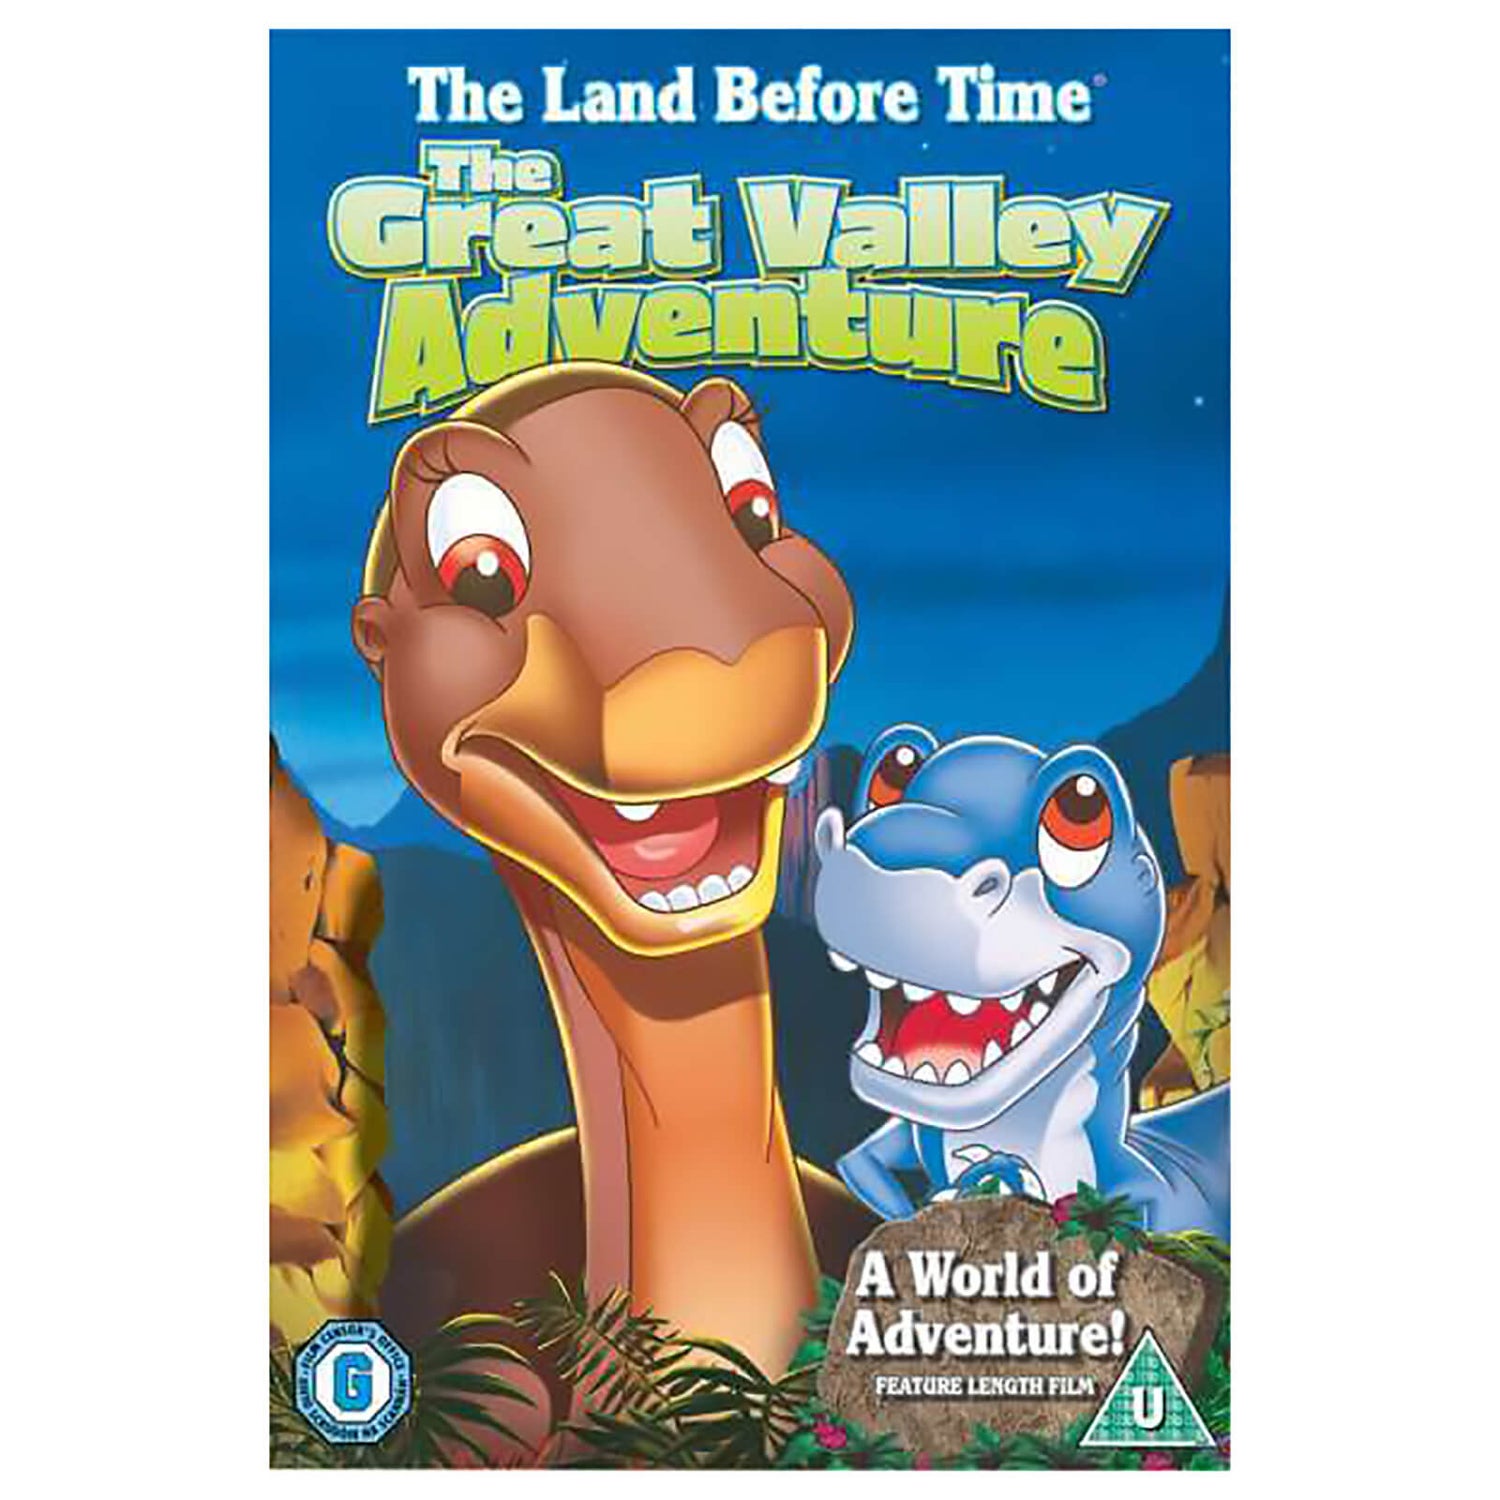 The Land Before Time 2: The Great Valley Adventure